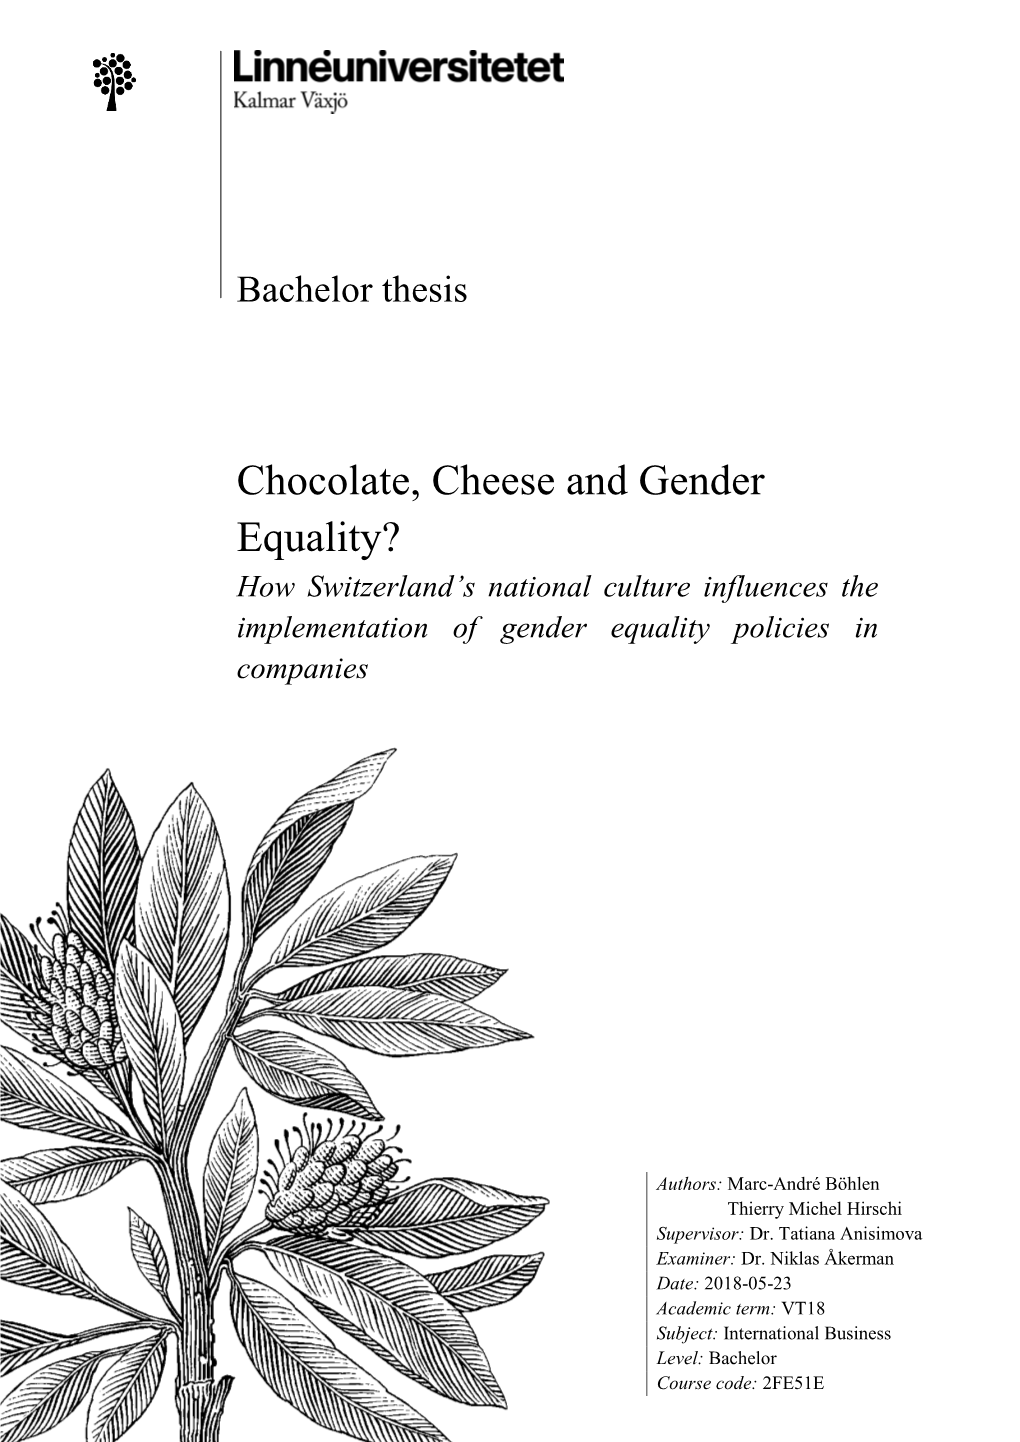 Chocolate, Cheese and Gender Equality? How Switzerland’S National Culture Influences the Implementation of Gender Equality Policies in Companies